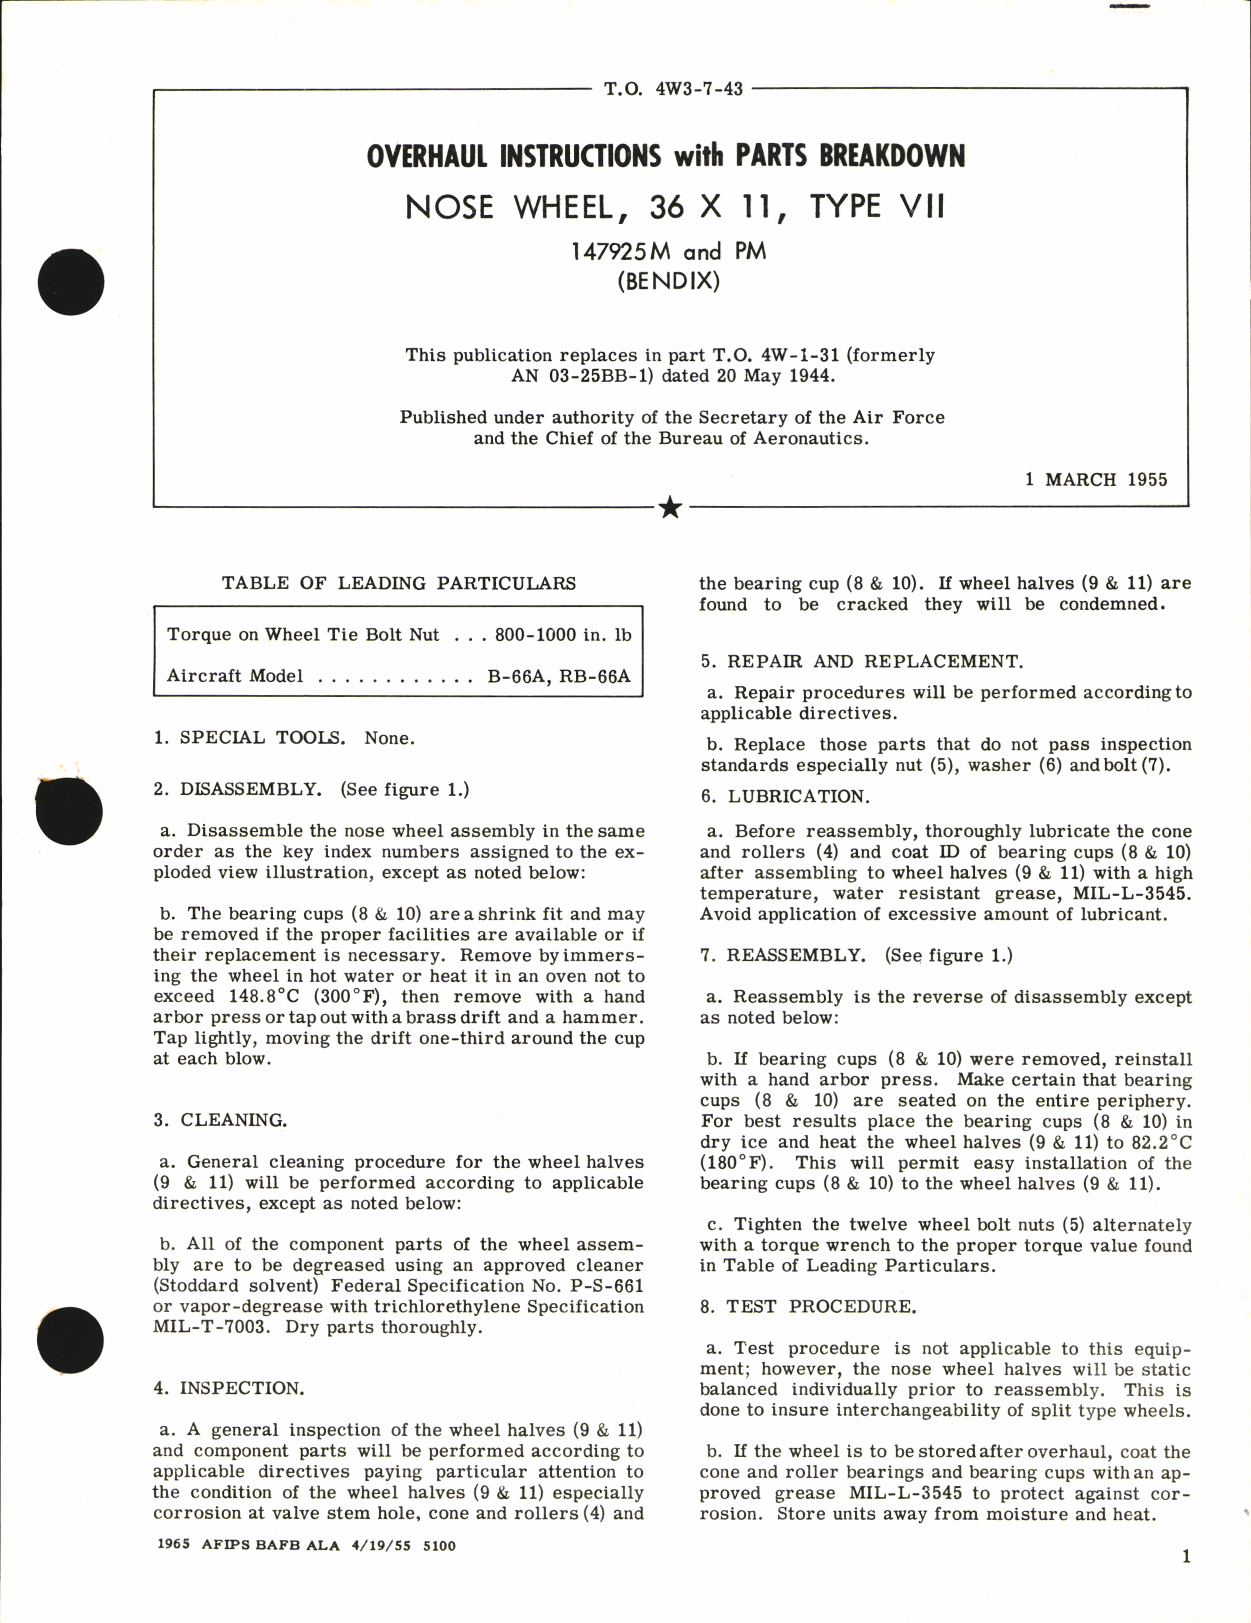 Sample page 1 from AirCorps Library document: Overhaul Instructions with Parts Breakdown for Nose Wheel 36 x 11, Type VII